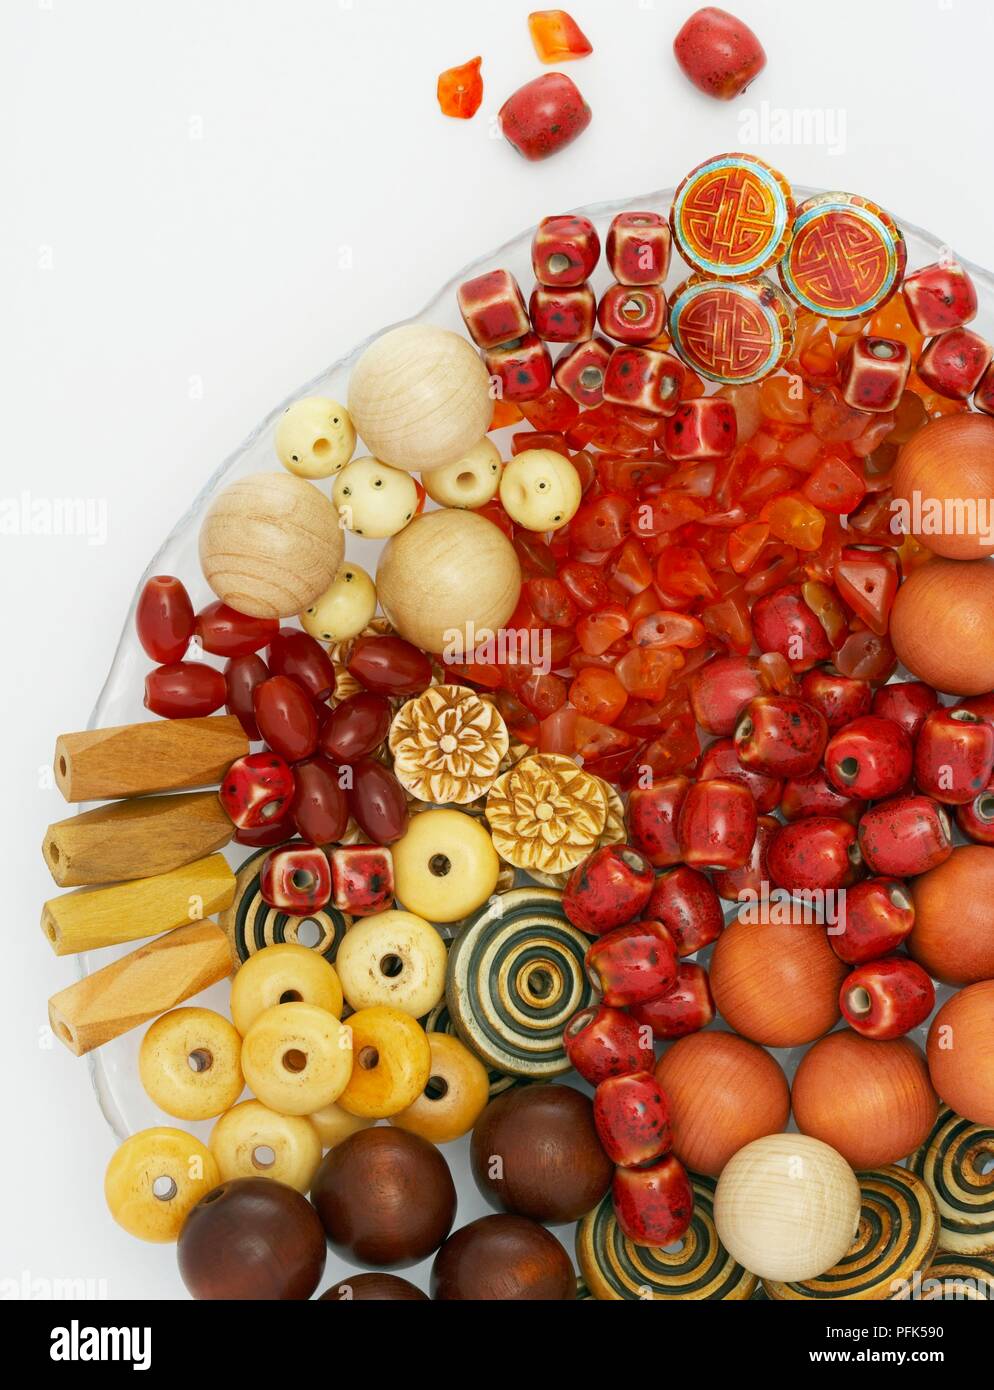 Assortment of differently shaped wood, bone, stone and ceramic beads on plate Stock Photo